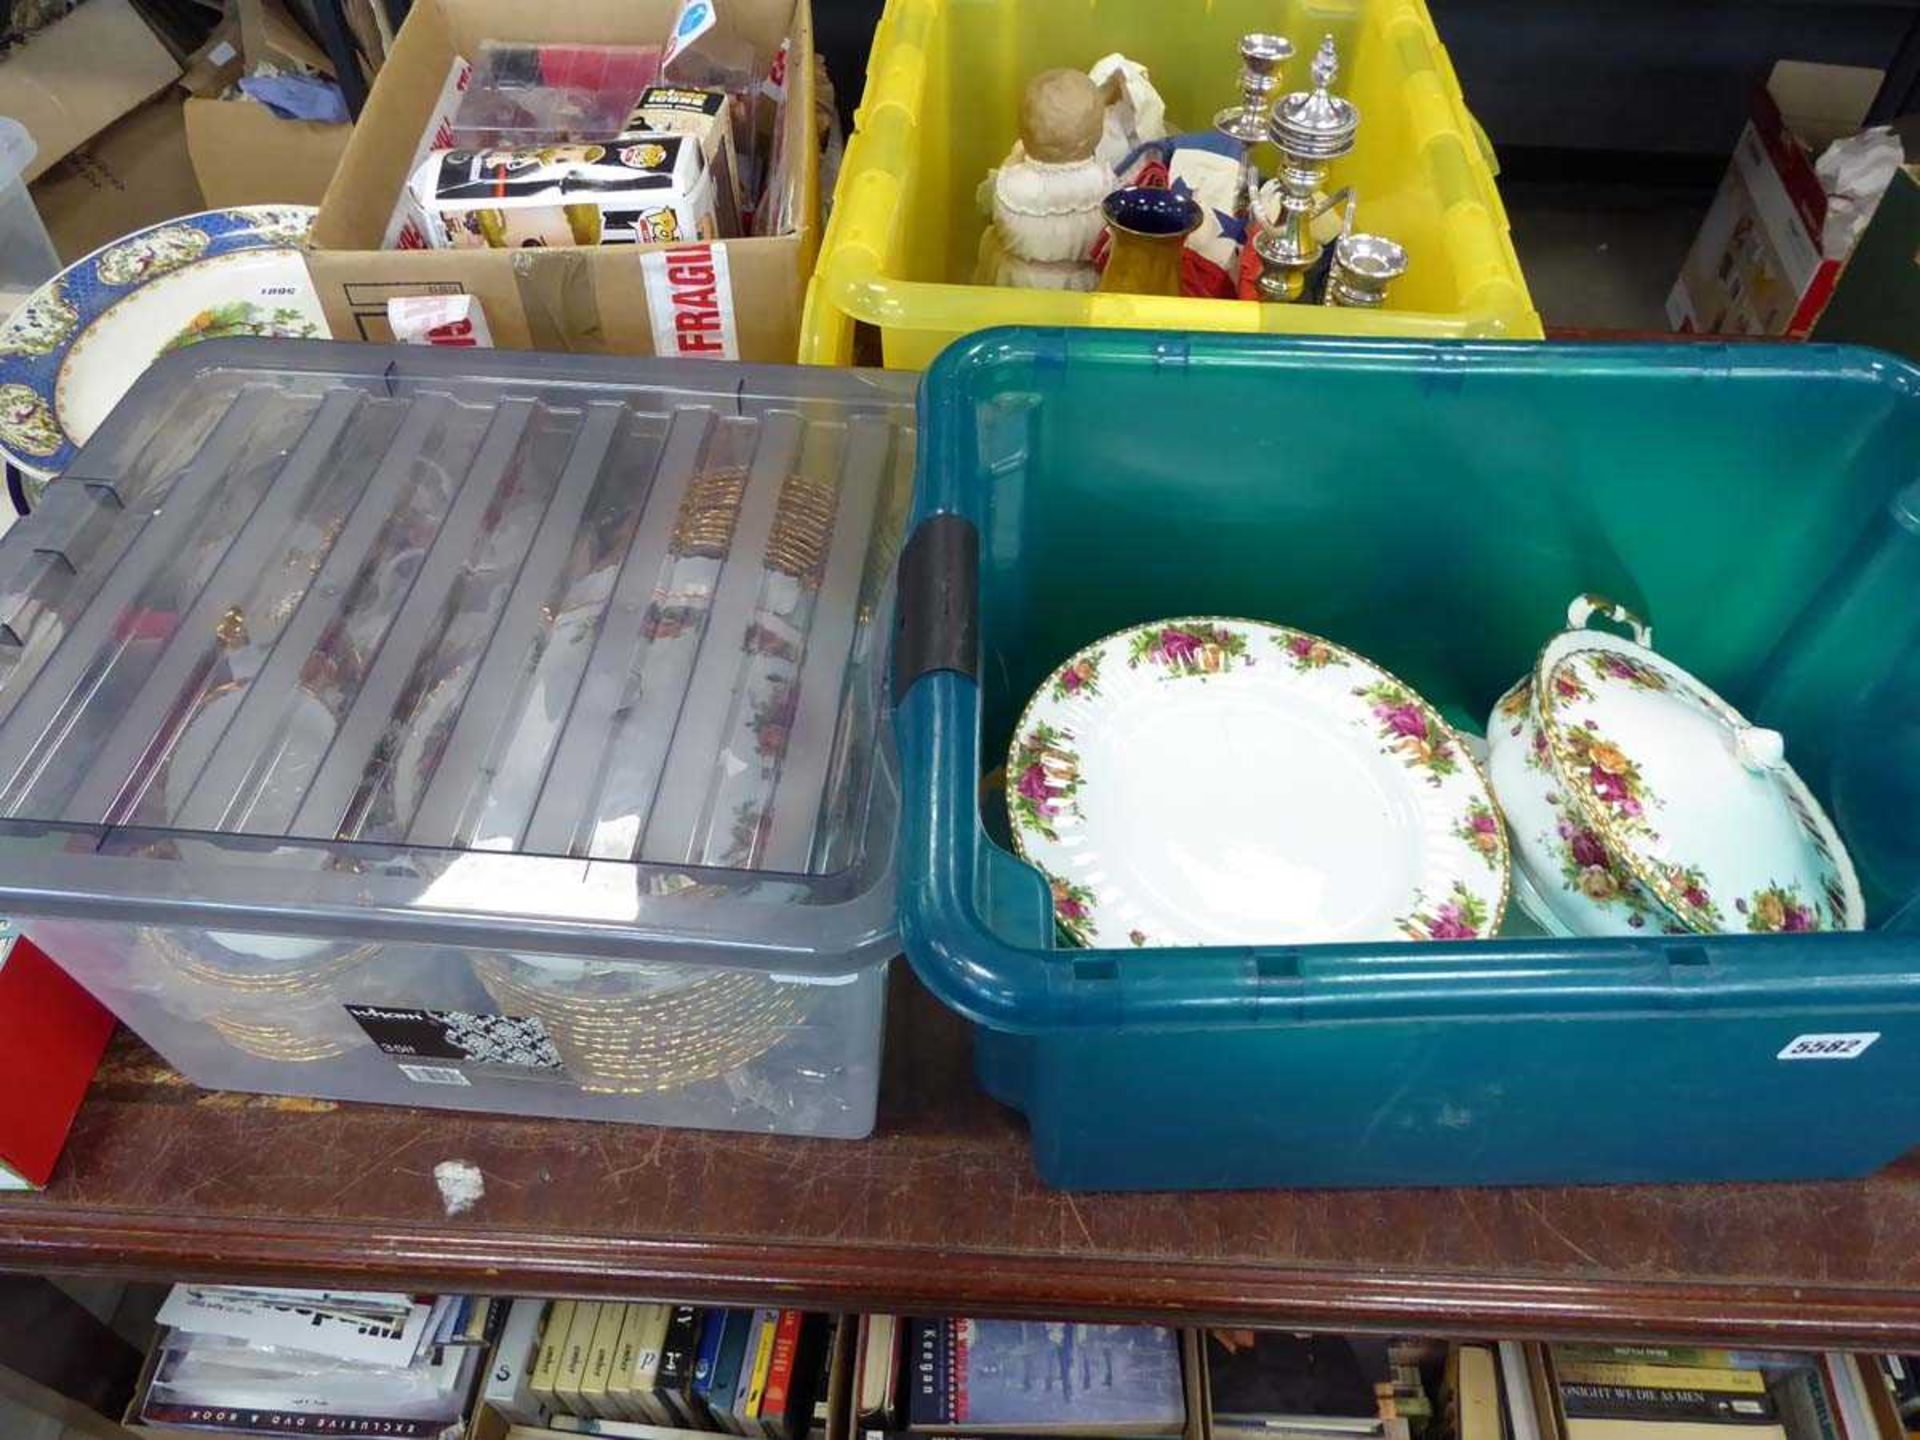 2 x boxes containing old country rose patterned crockery